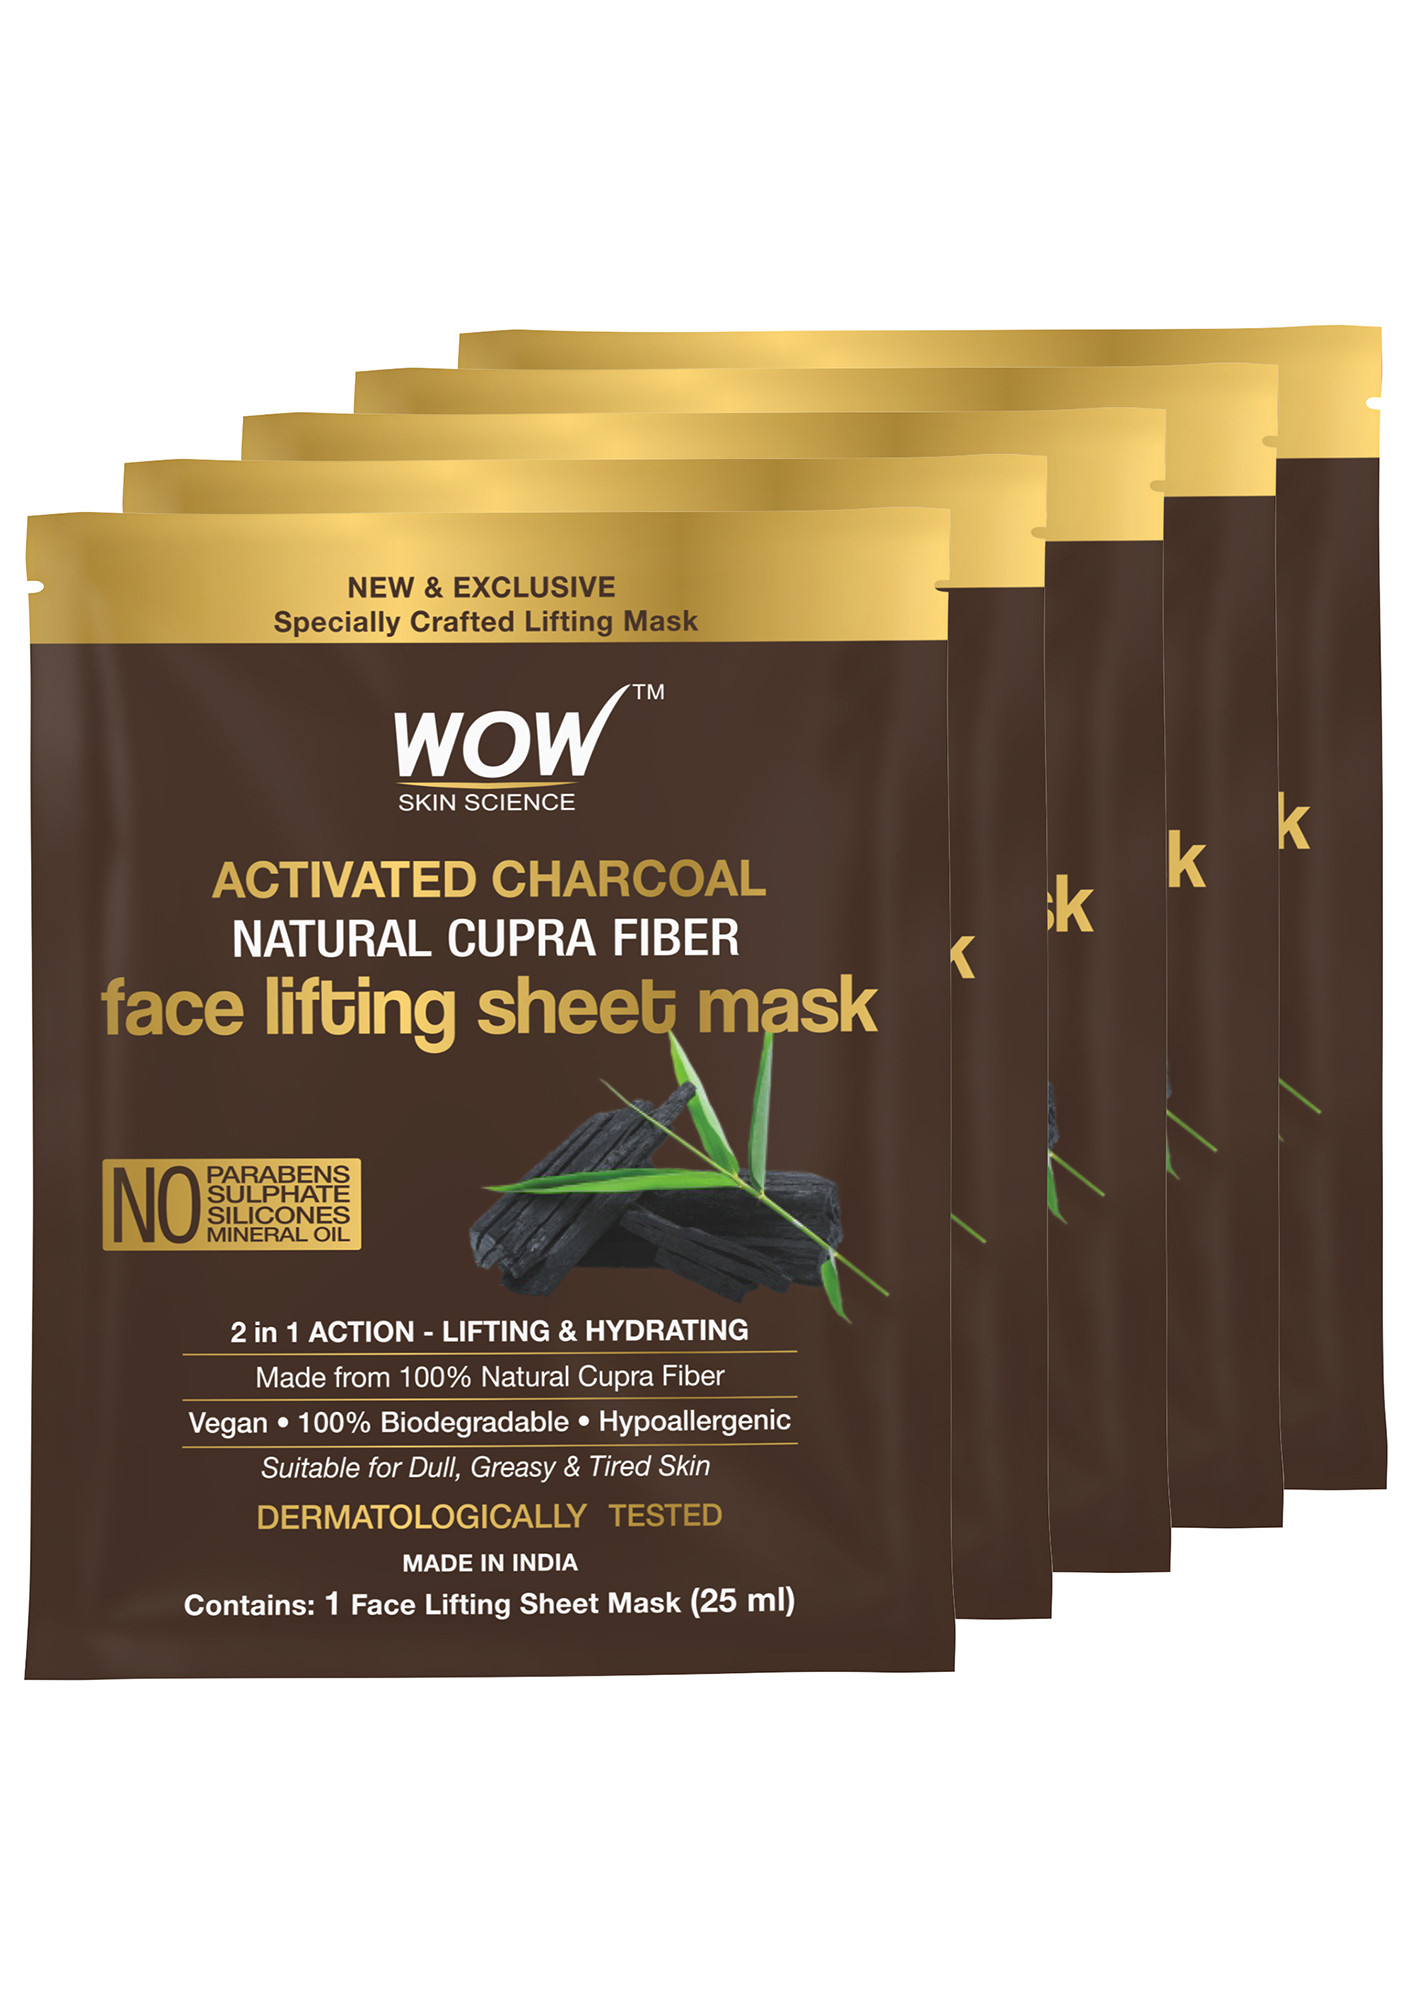 WOW Skin Science Activated Charcoal Natural Cupra Fiber Face Lifting Sheet Mask - For Skin Purification and Skin Hydration - 25ml - Pack of 5